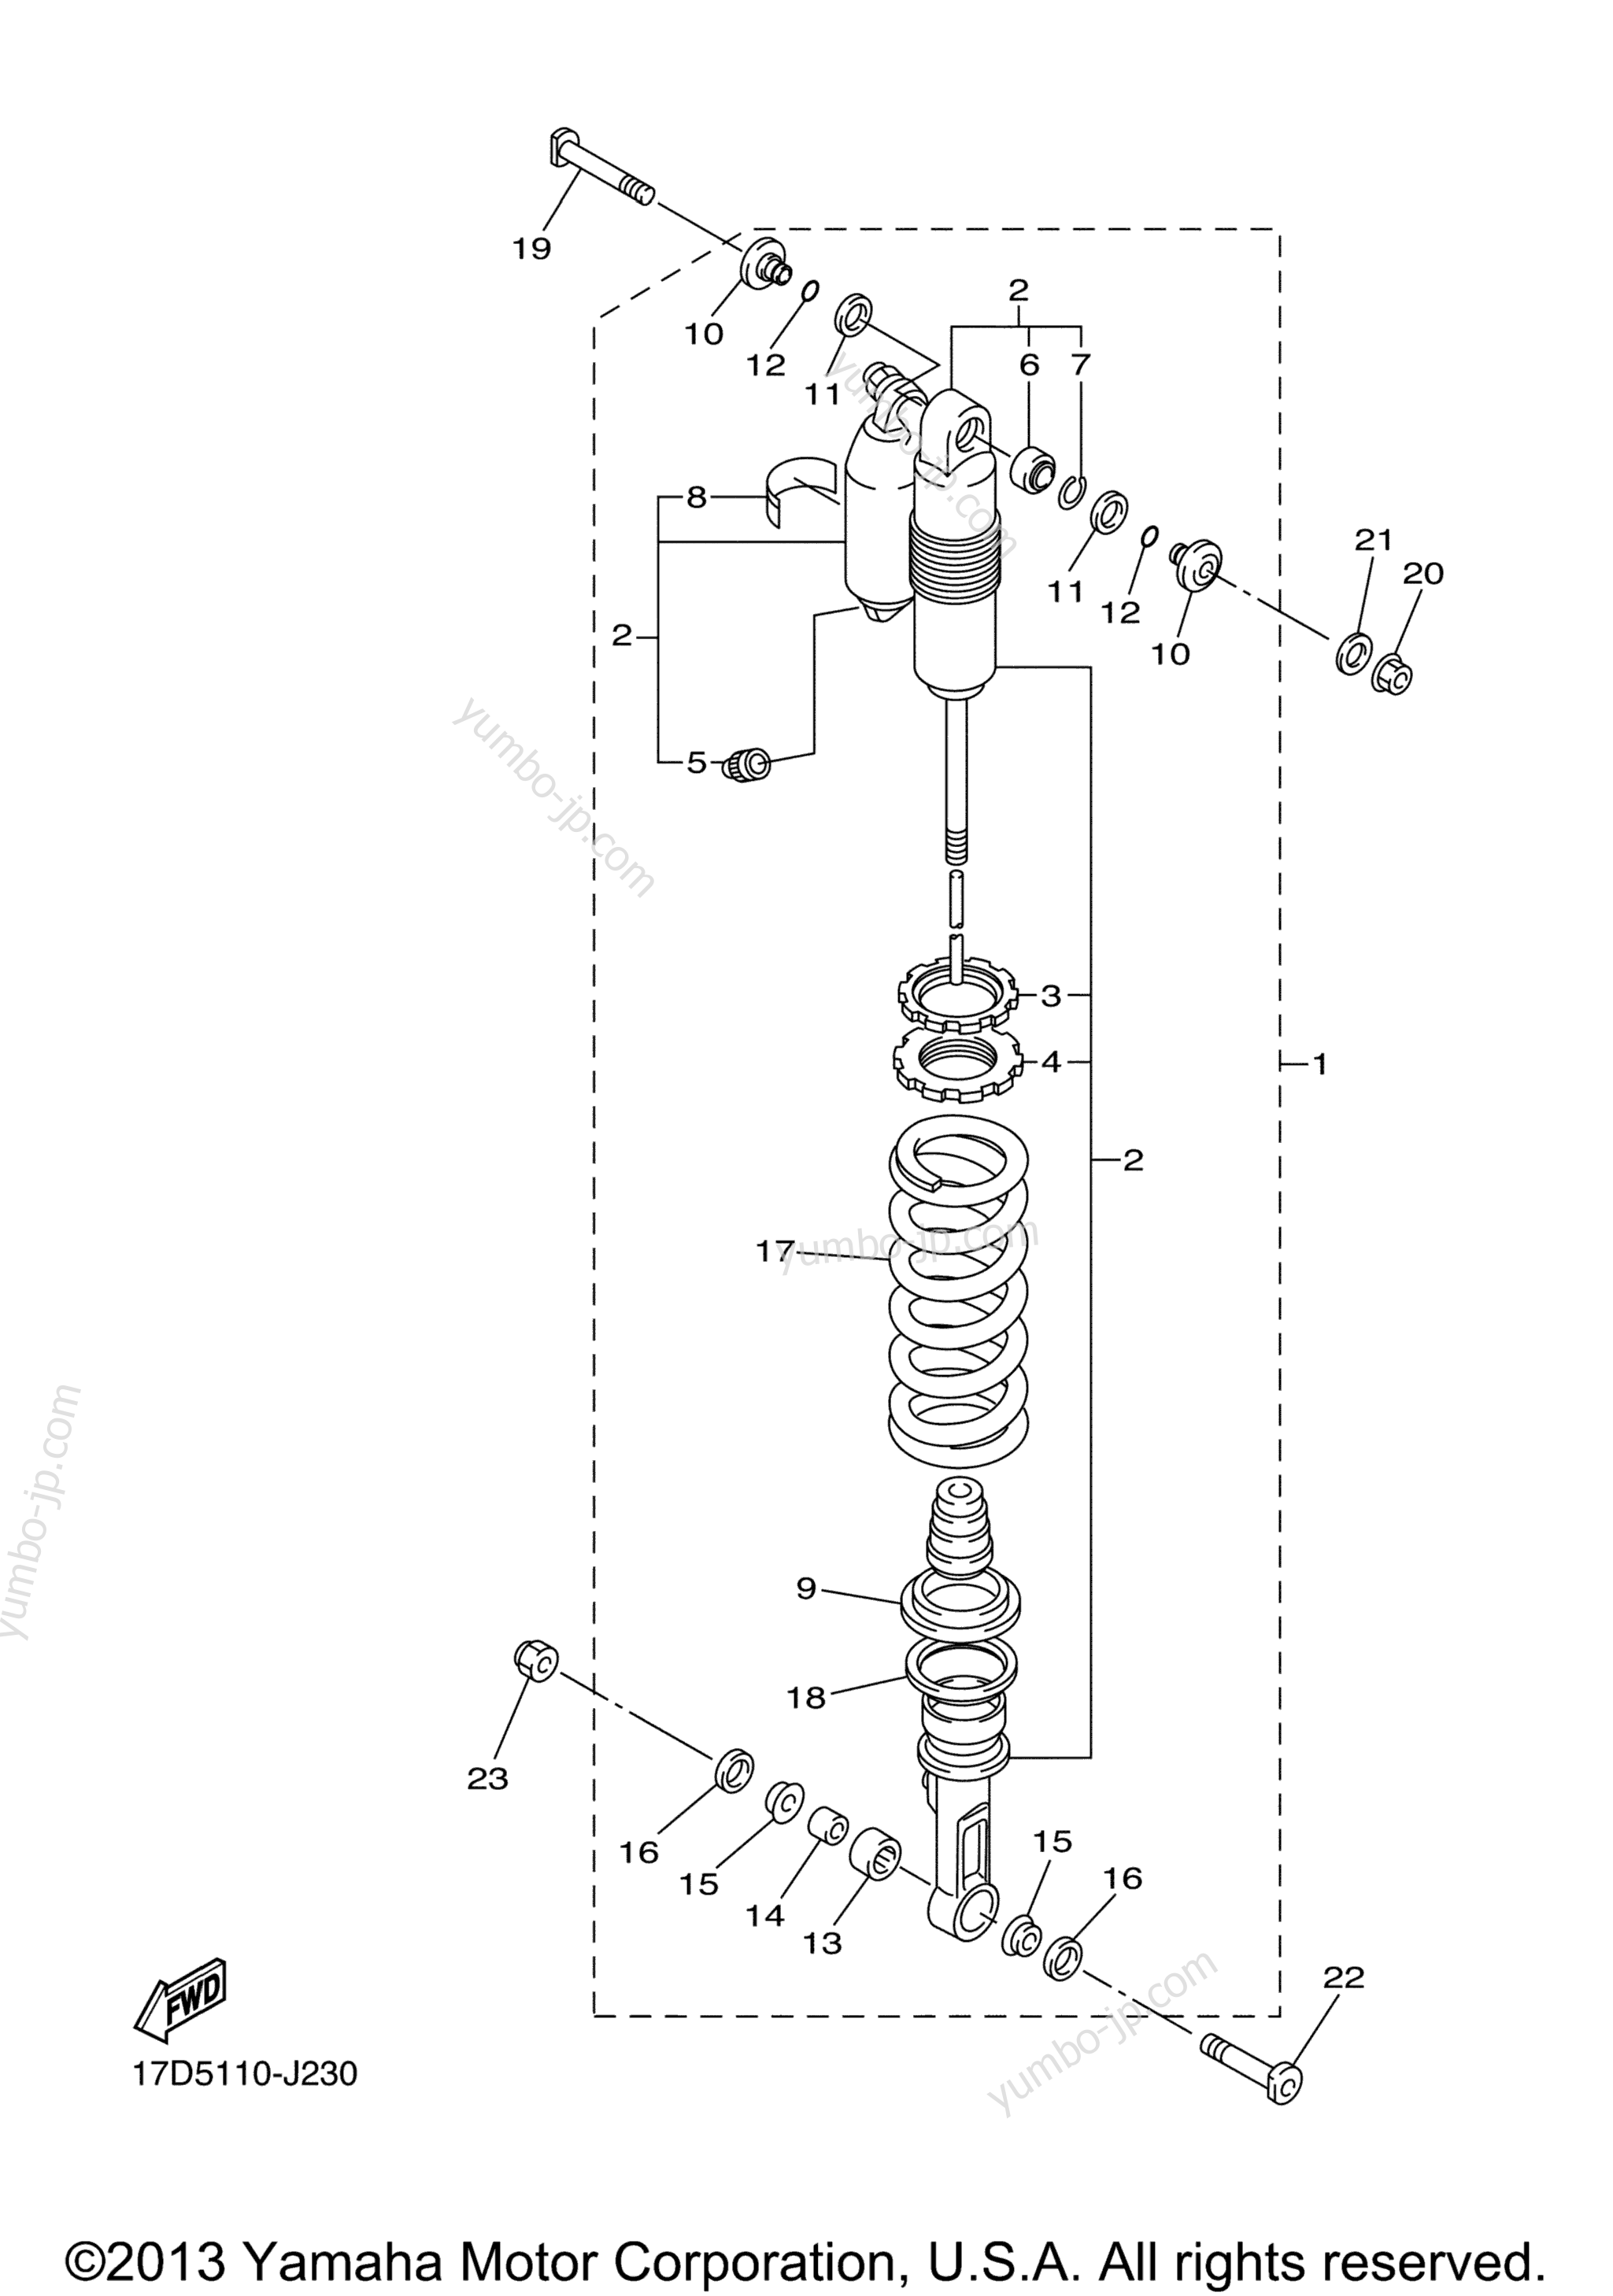 Rear Suspension for motorcycles YAMAHA YZ250F (YZ250FDL) 2013 year